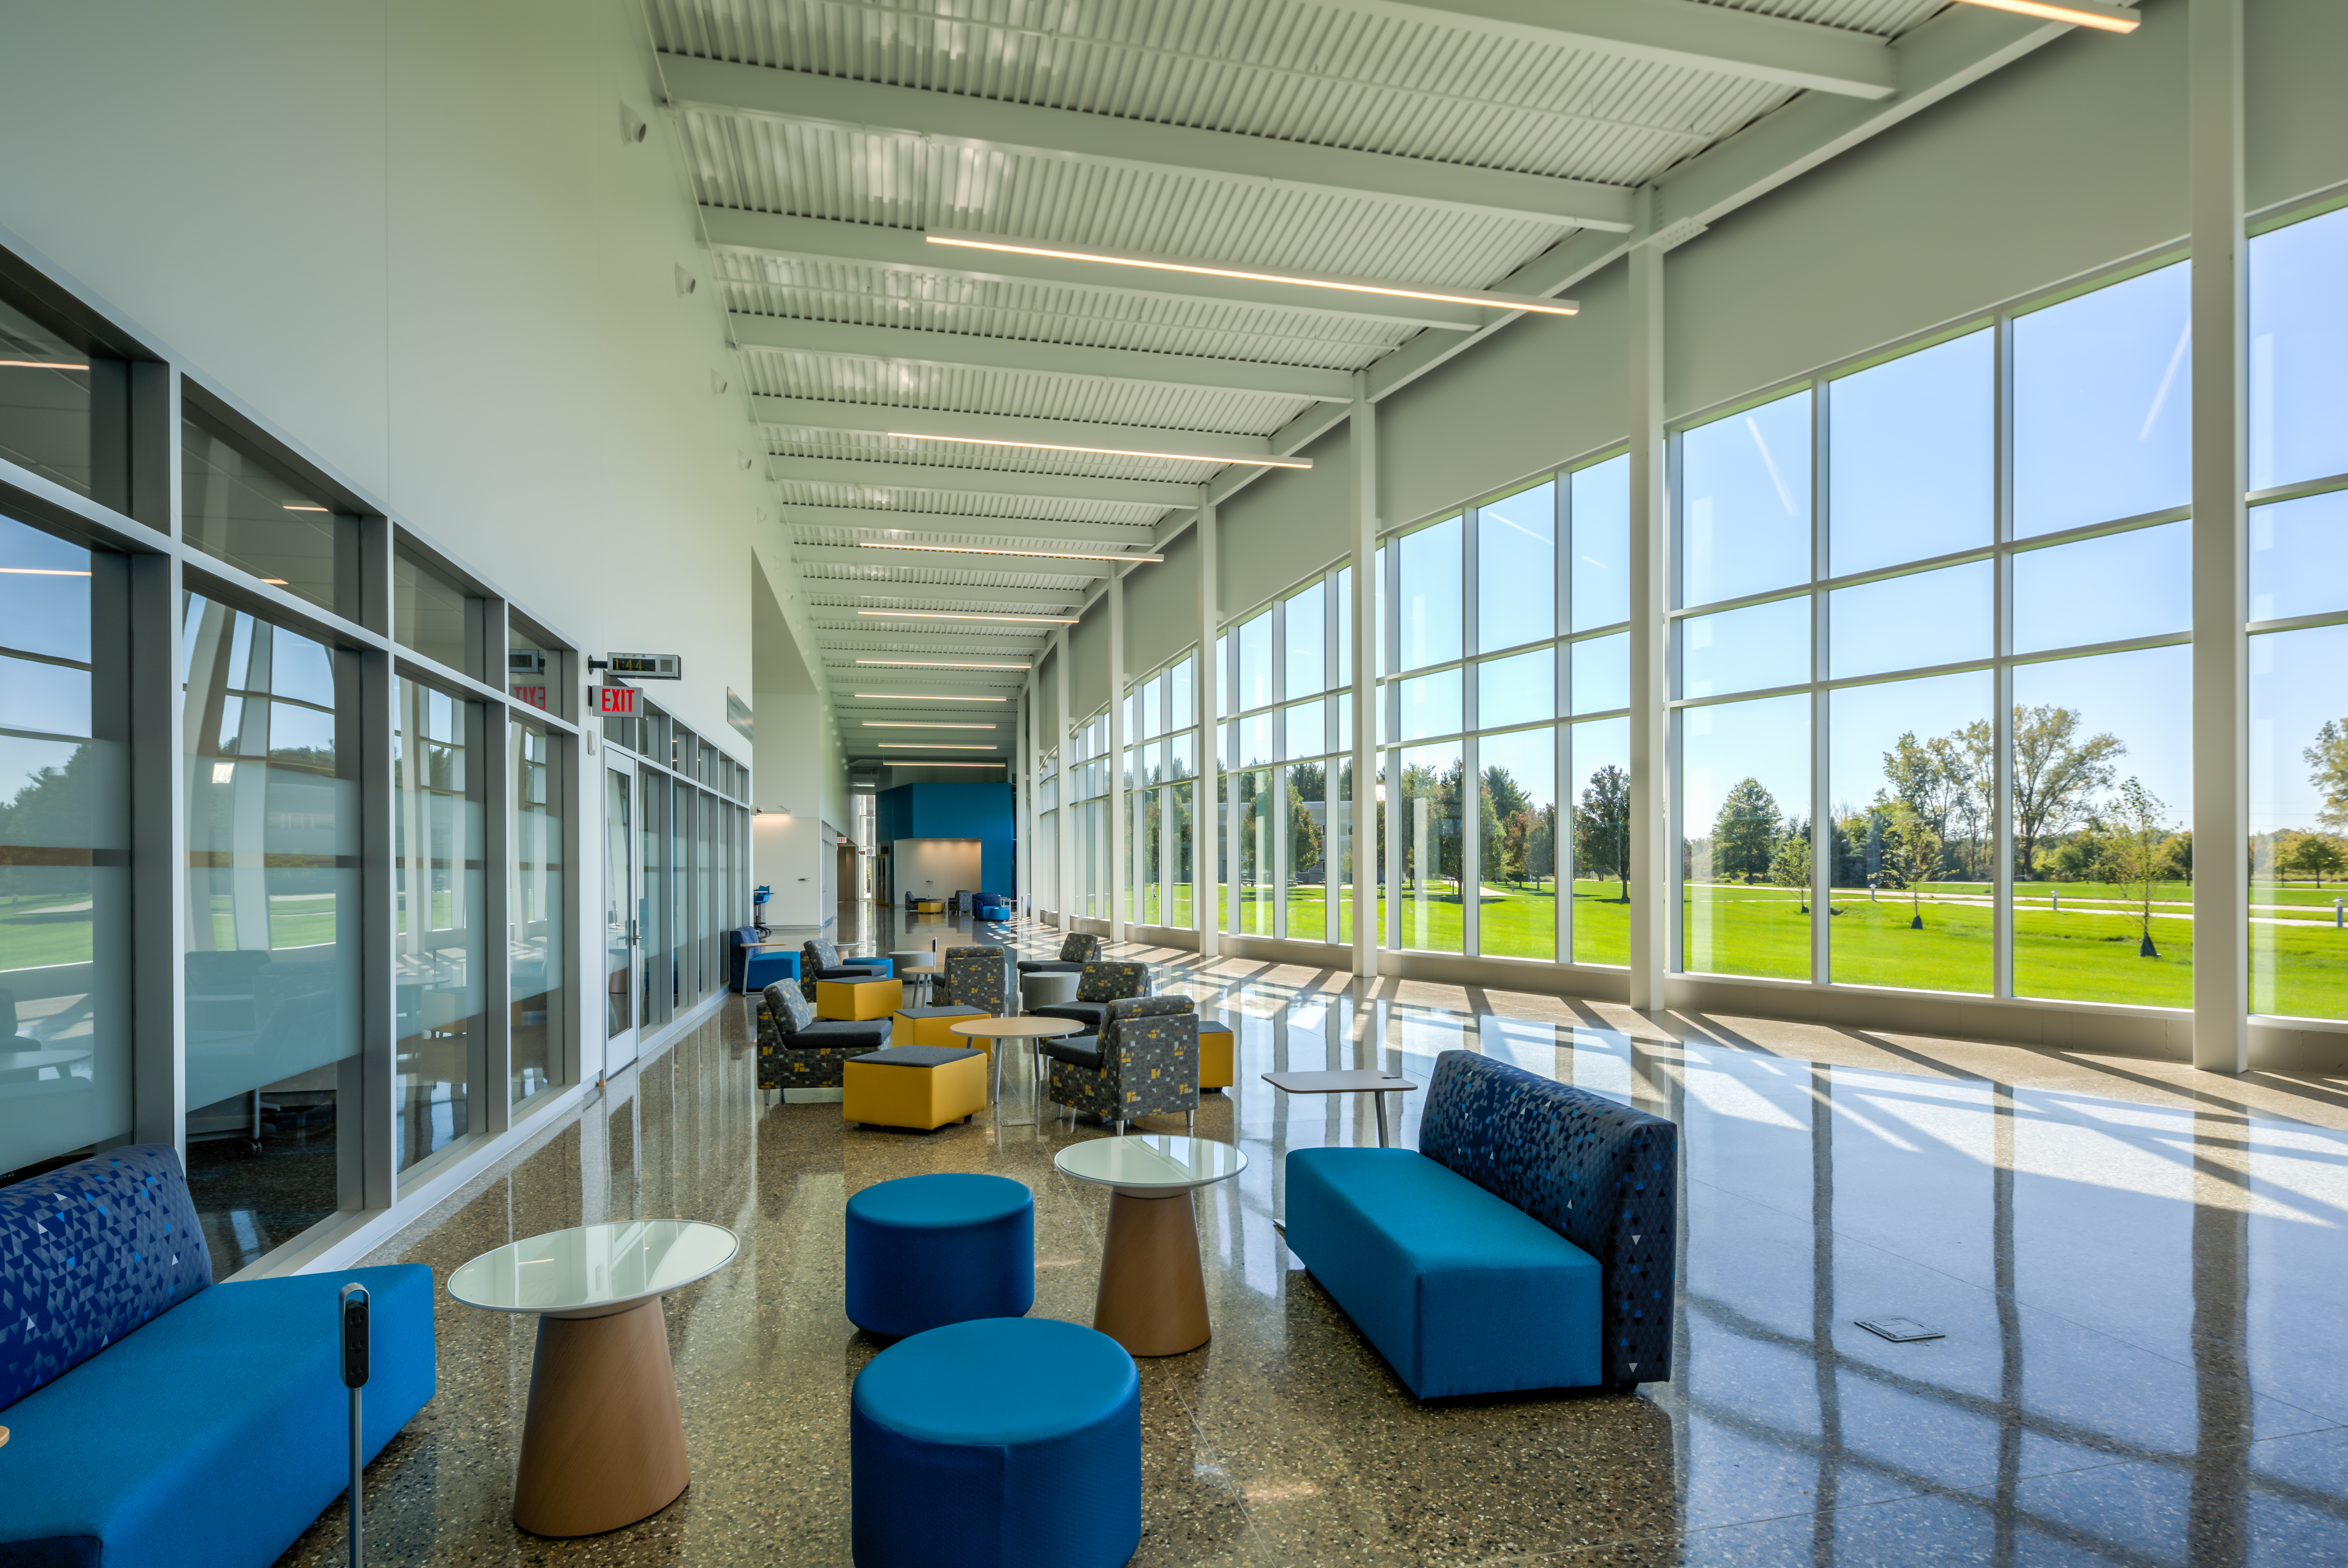 The public area features a full wall of windows and spaces for students to collaborate and study.